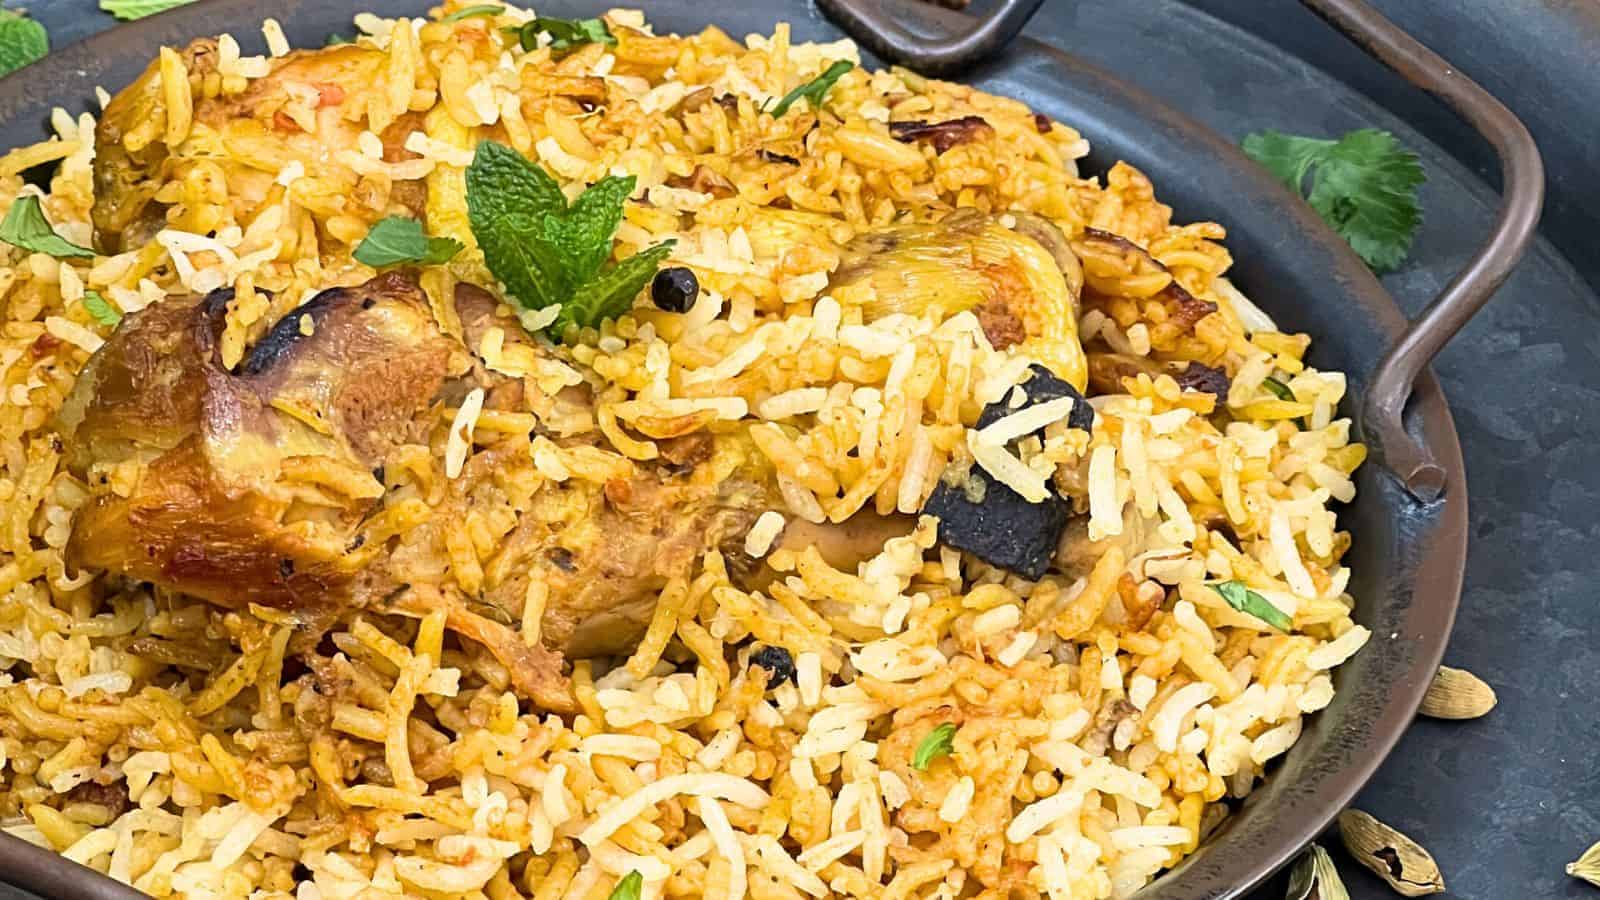 Close-up image of chicken biryani in a copper dish, garnished with mint and coriander leaves.